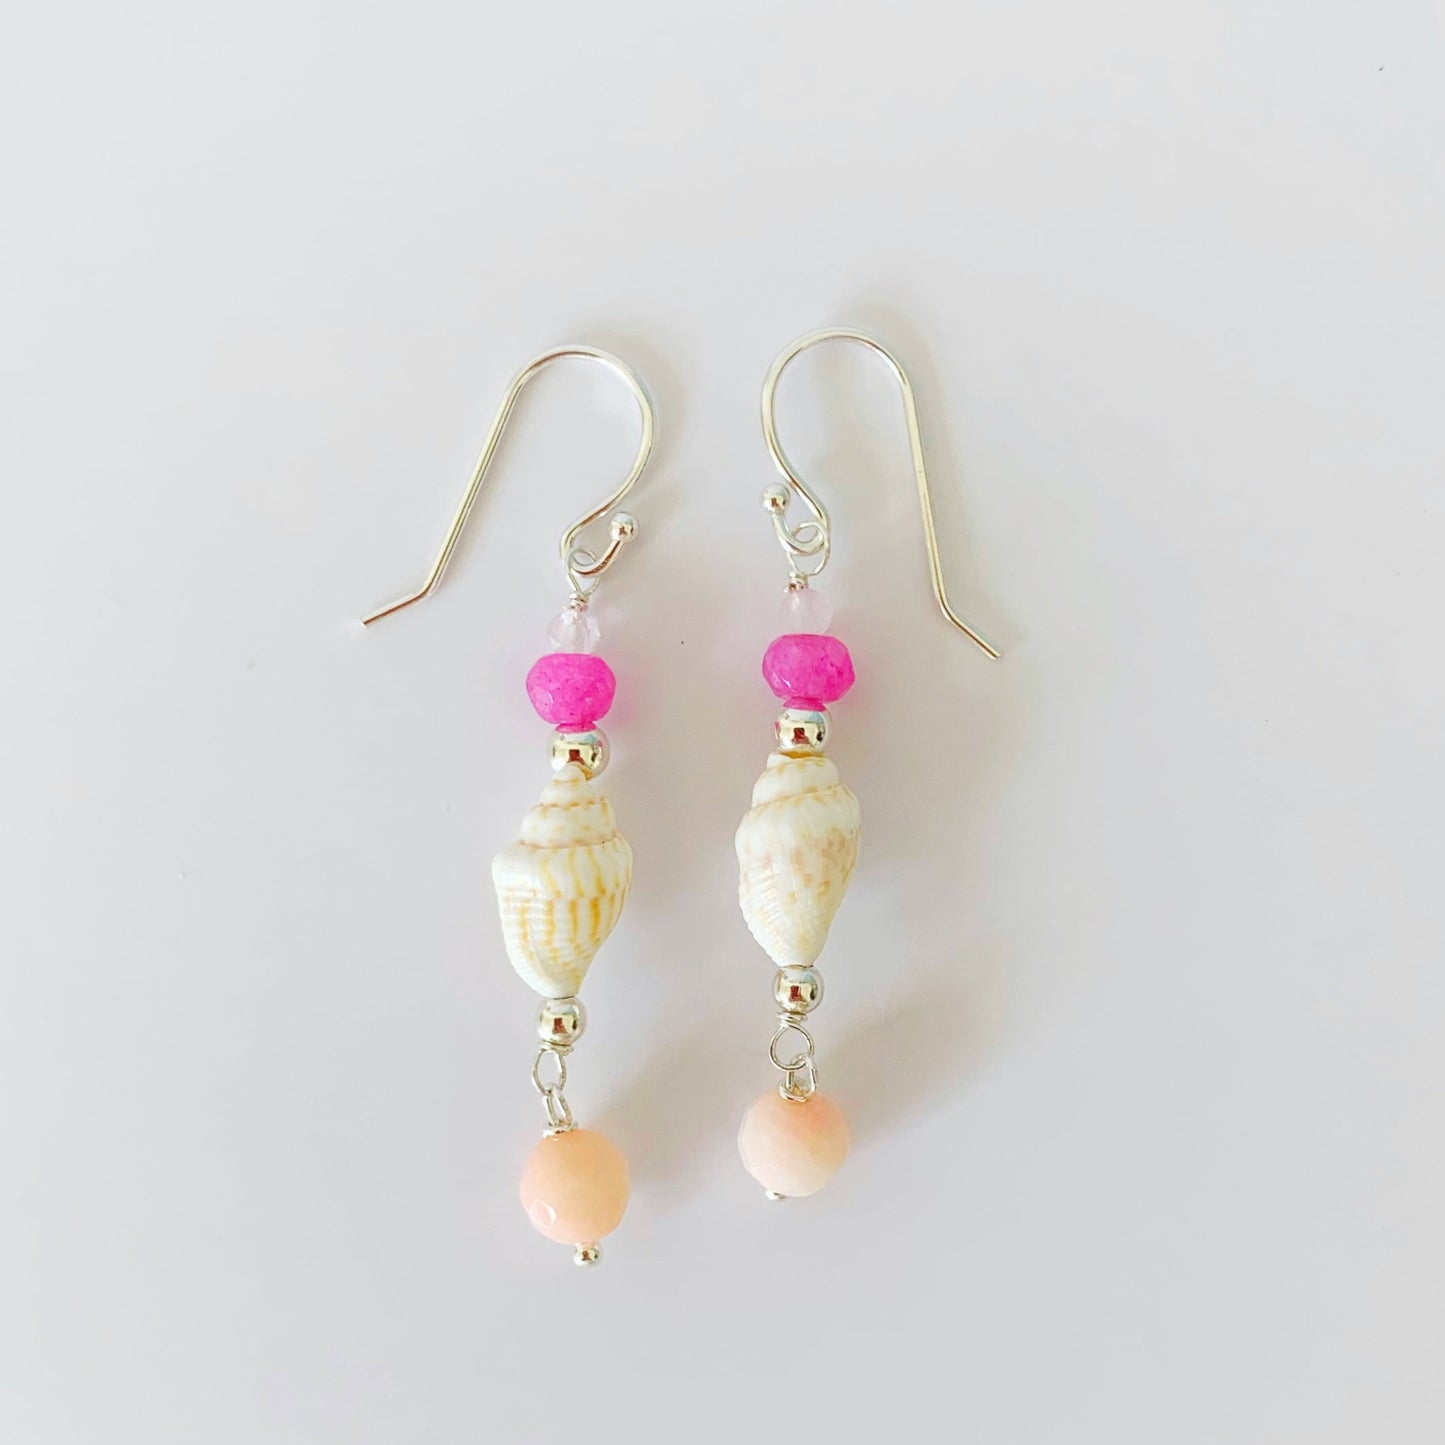 The pink flamingo shellebration earrings by mermaids and madeleines are a linear drop earring featuring a shell at the center complimented by dyed pink jade, rose quartz and a coral drop bead all with sterling silver findings. this pair is photographed on a white surface.